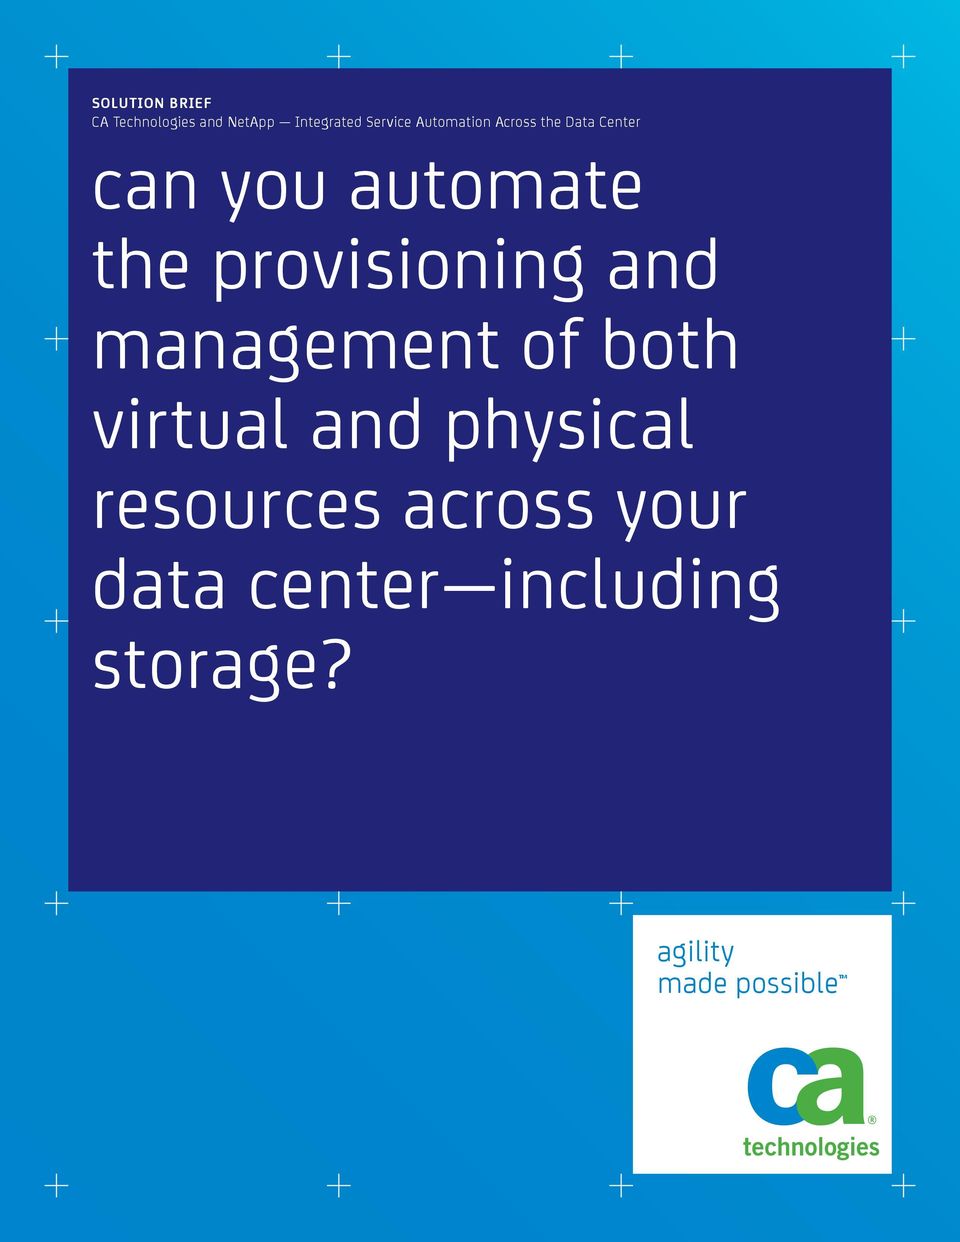 provisioning and management of both virtual and physical